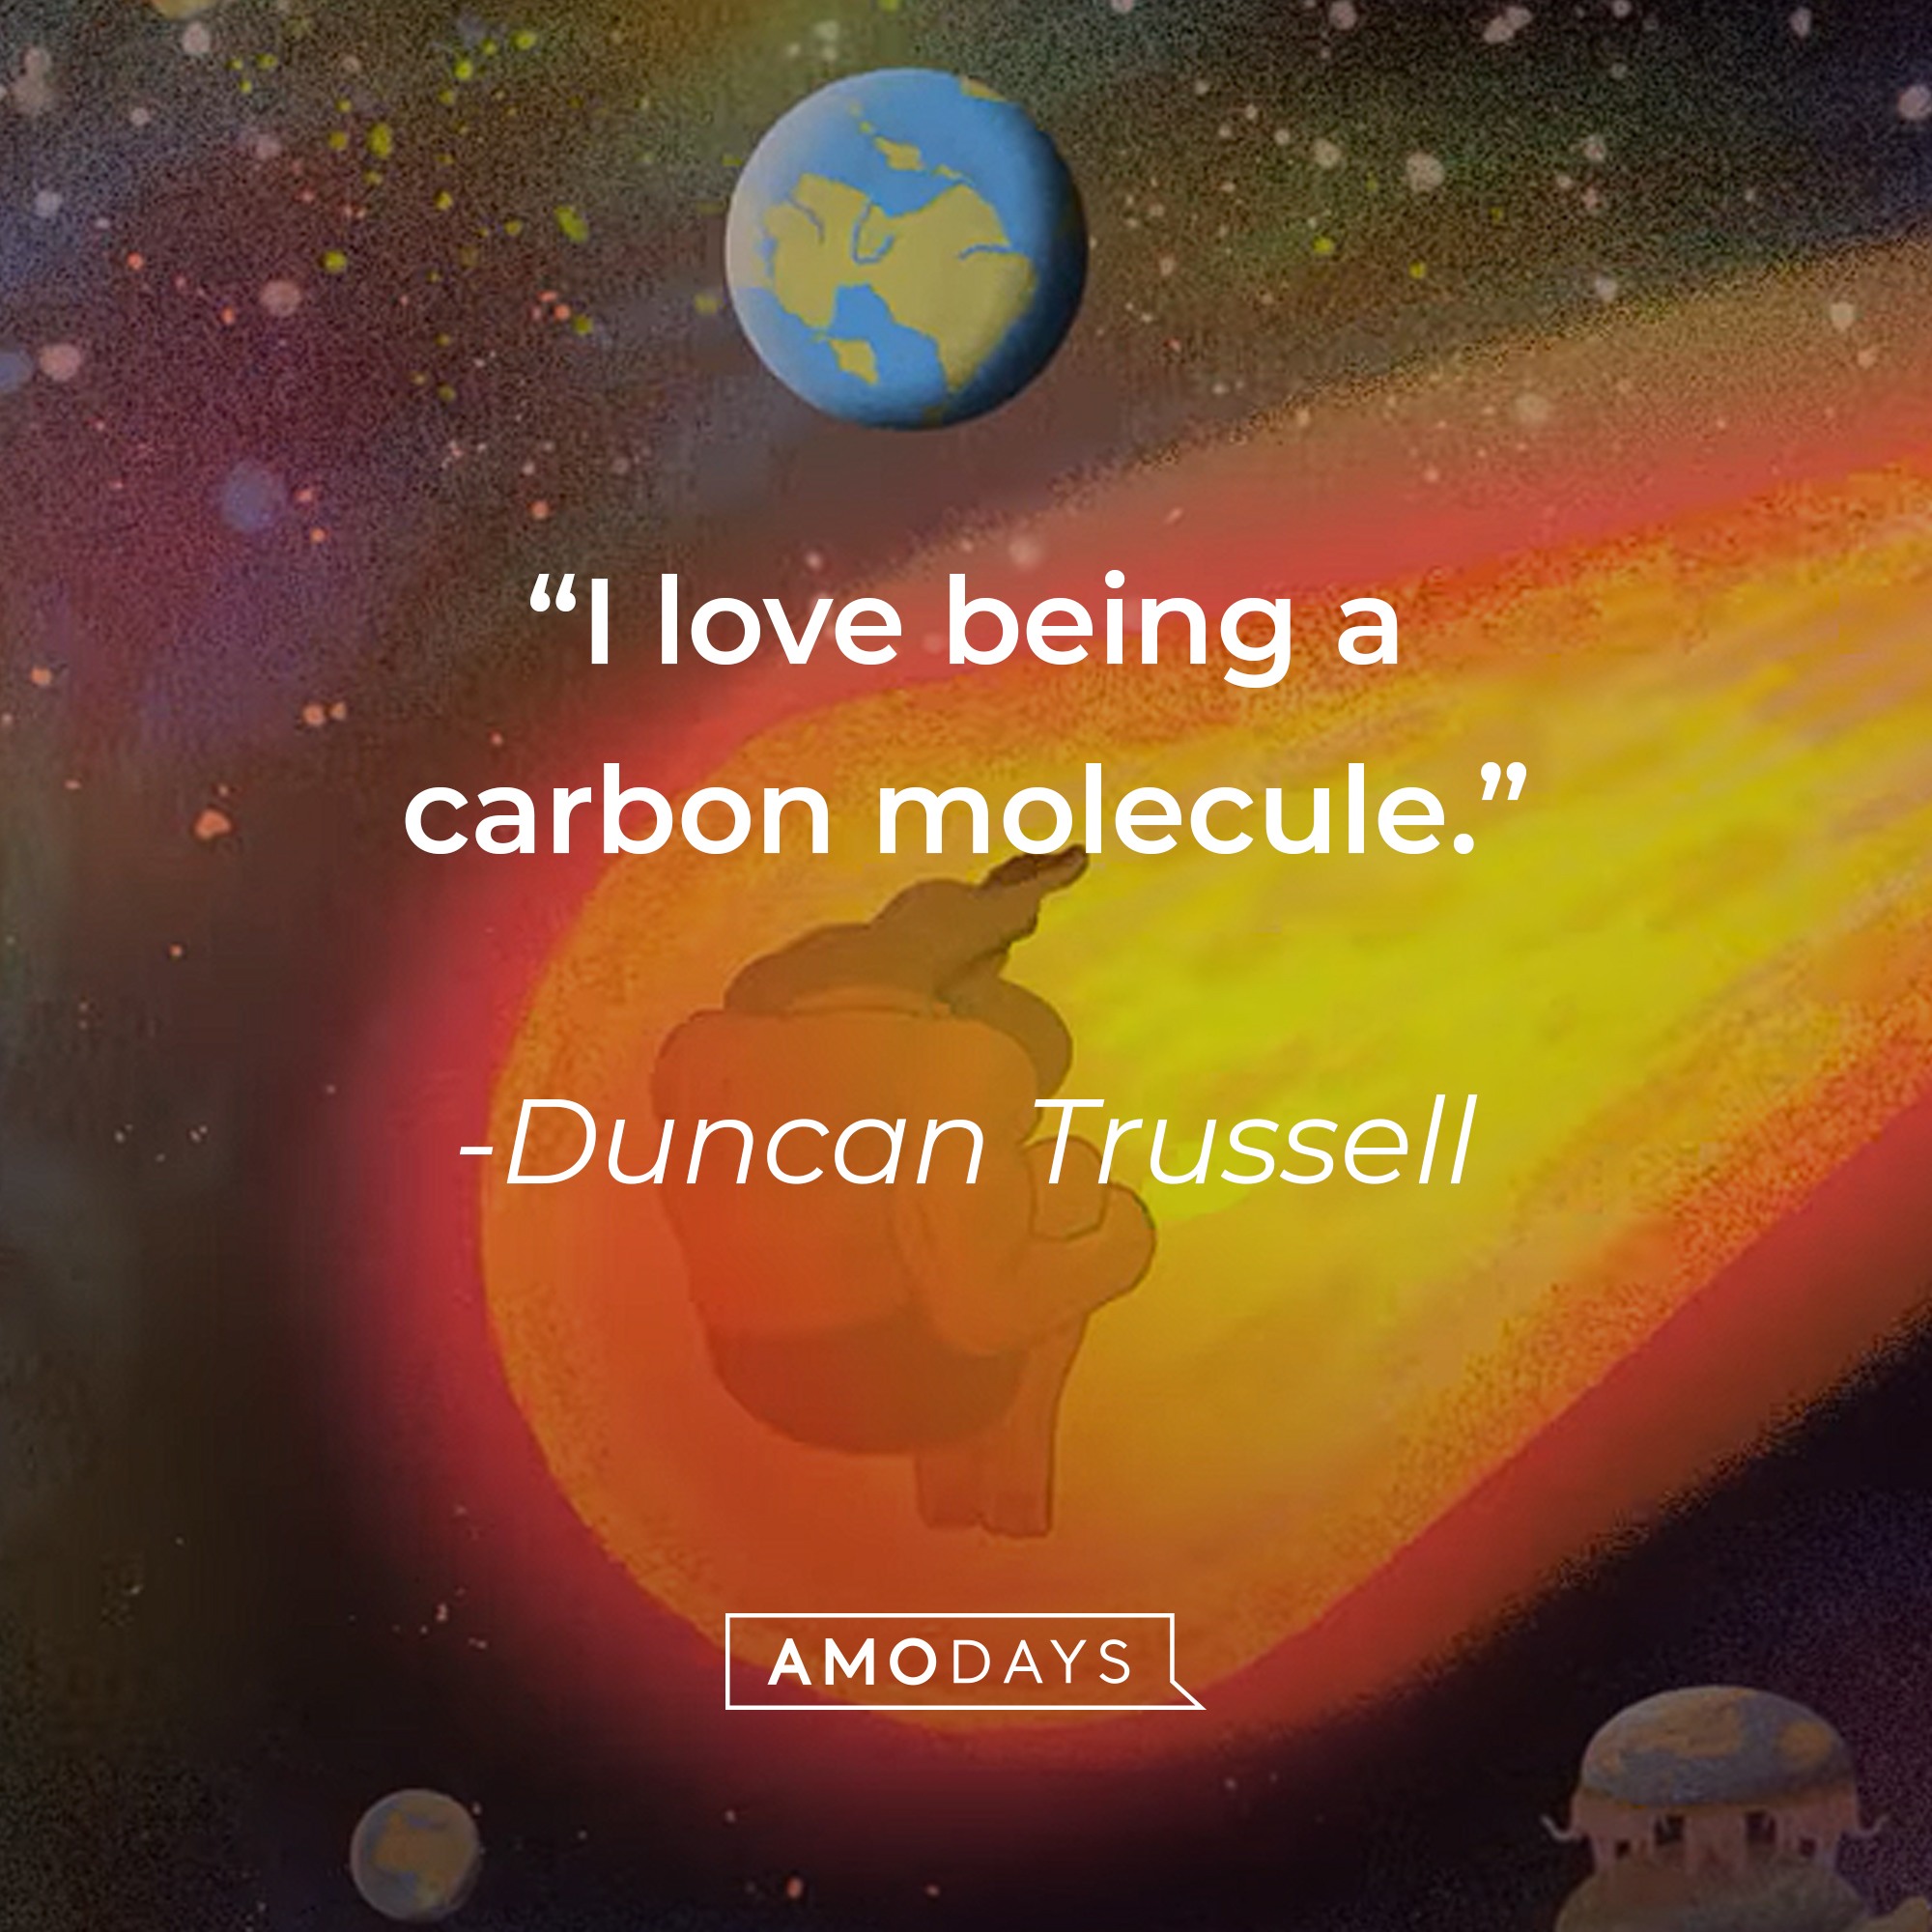 Duncan Trussell's quote: "I love being a carbon molecule." | Source: youtube.com/Netflix